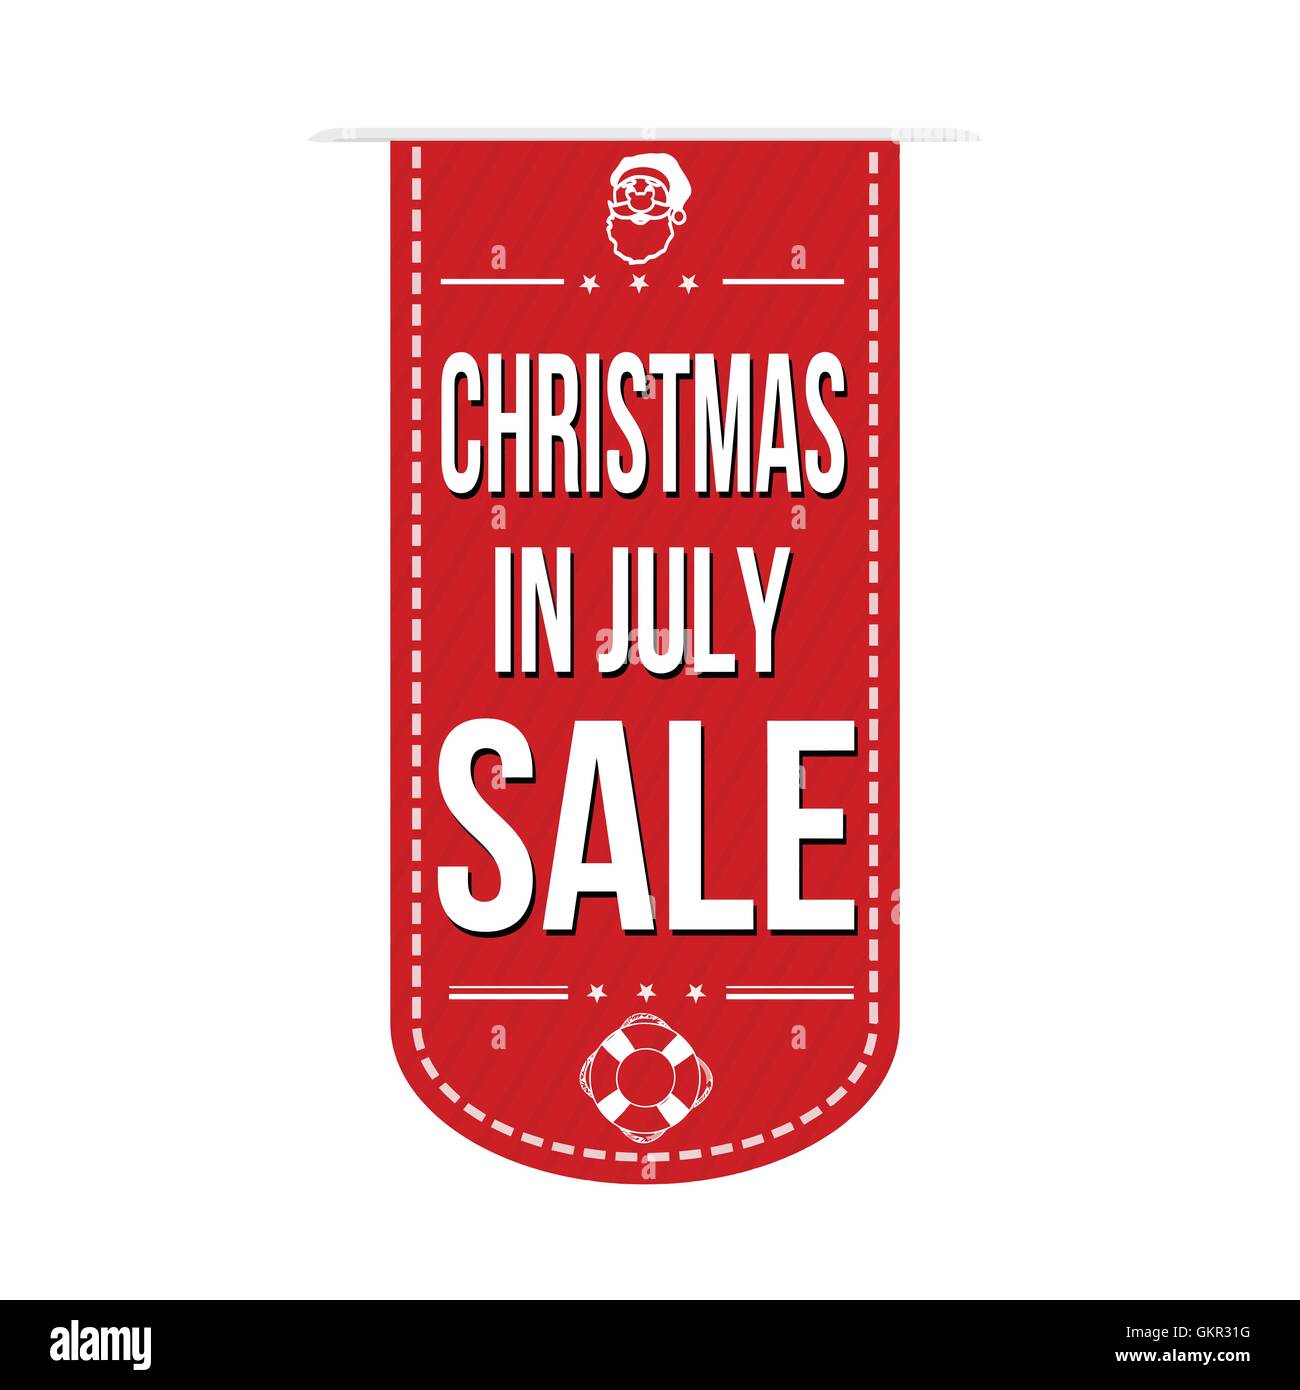 Christmas in july sale banner design Stock Vector